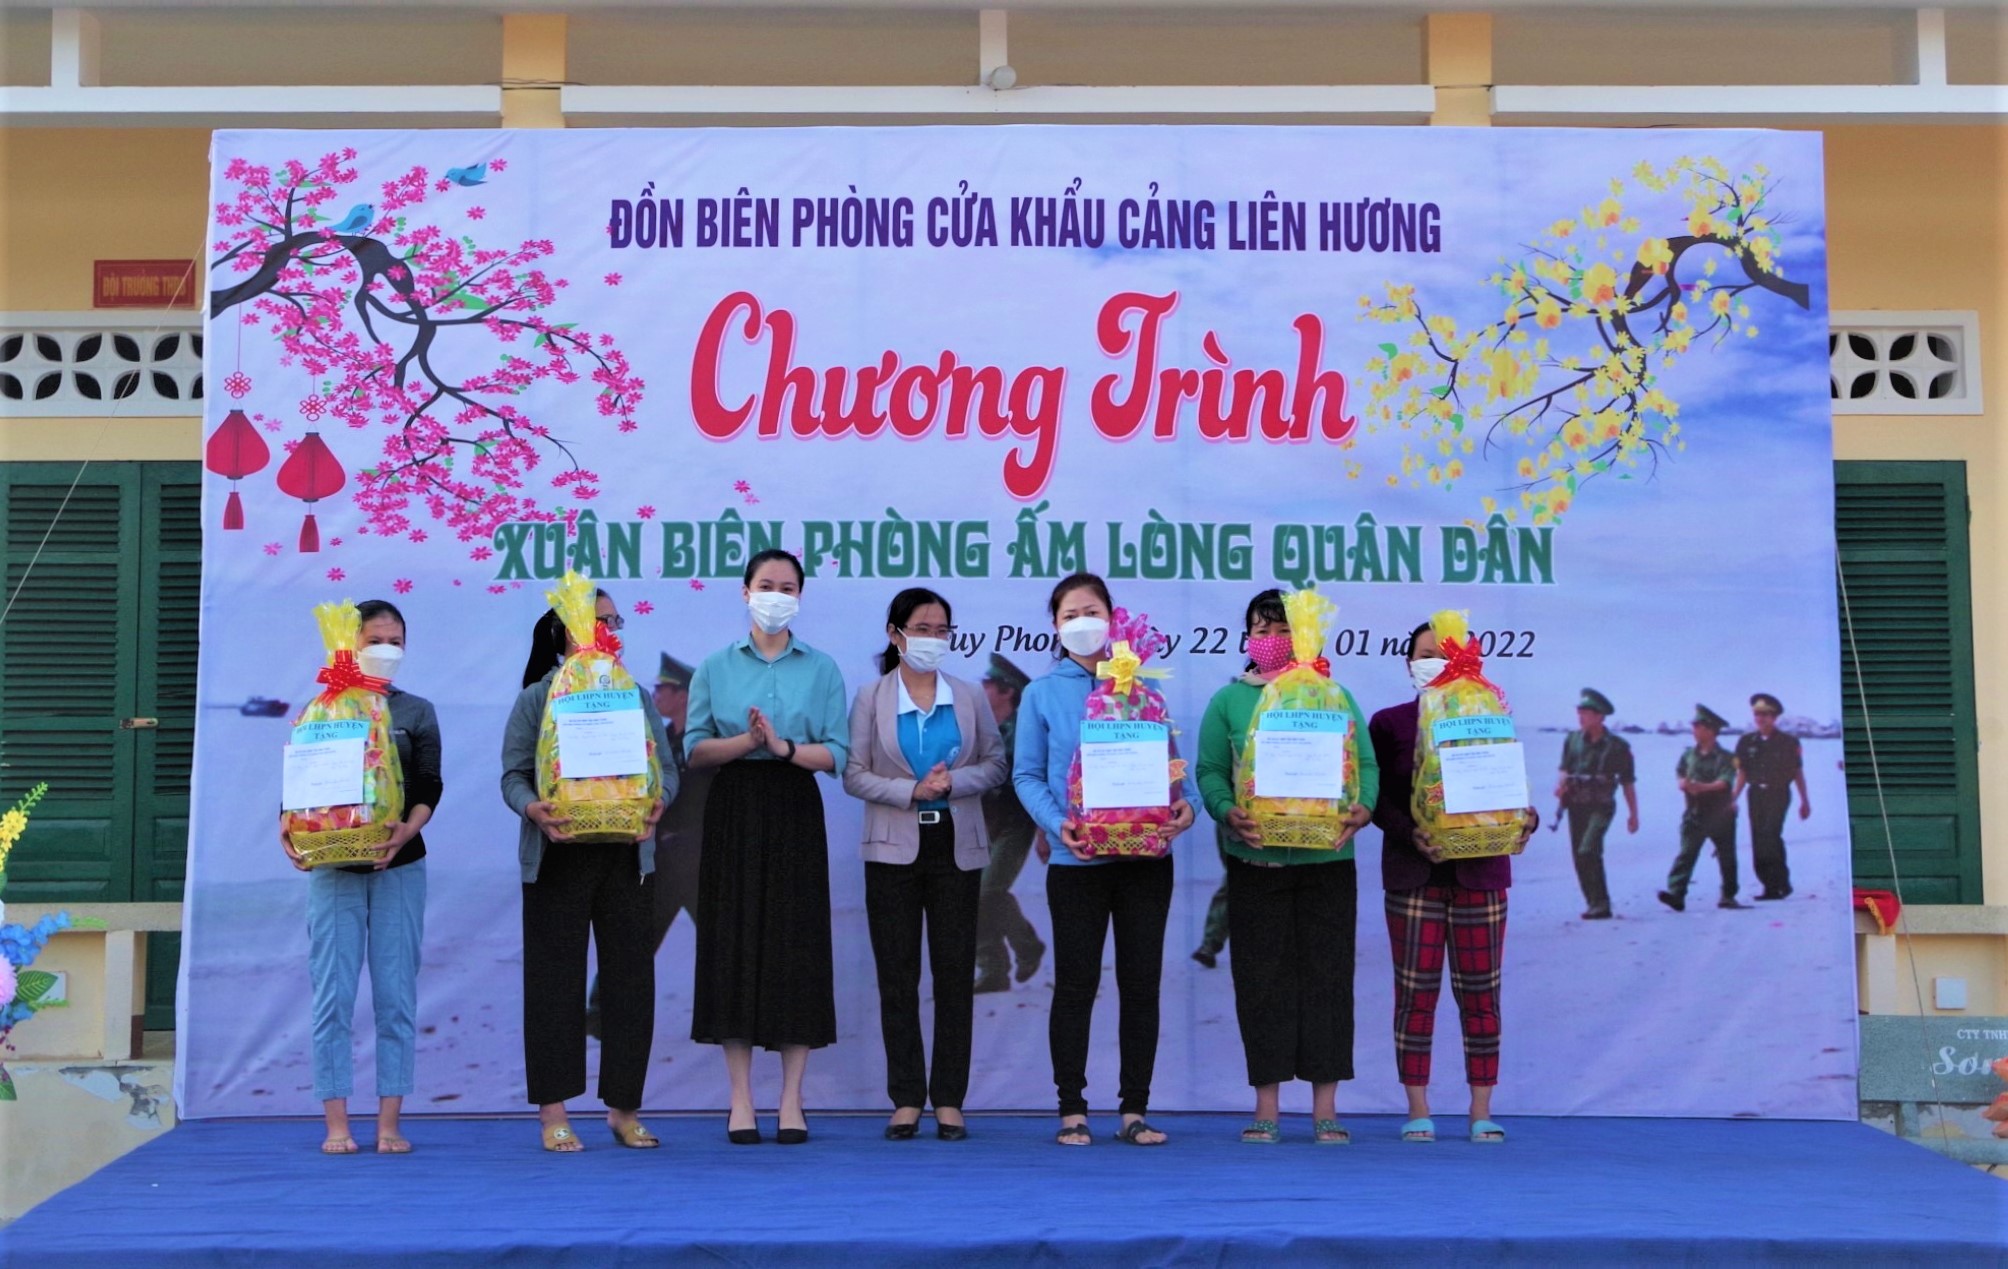 Warm gifts to underprivileged people in the traditional Lunar New Year holiday (Tet) in Binh Thuan and Ninh Thuan province